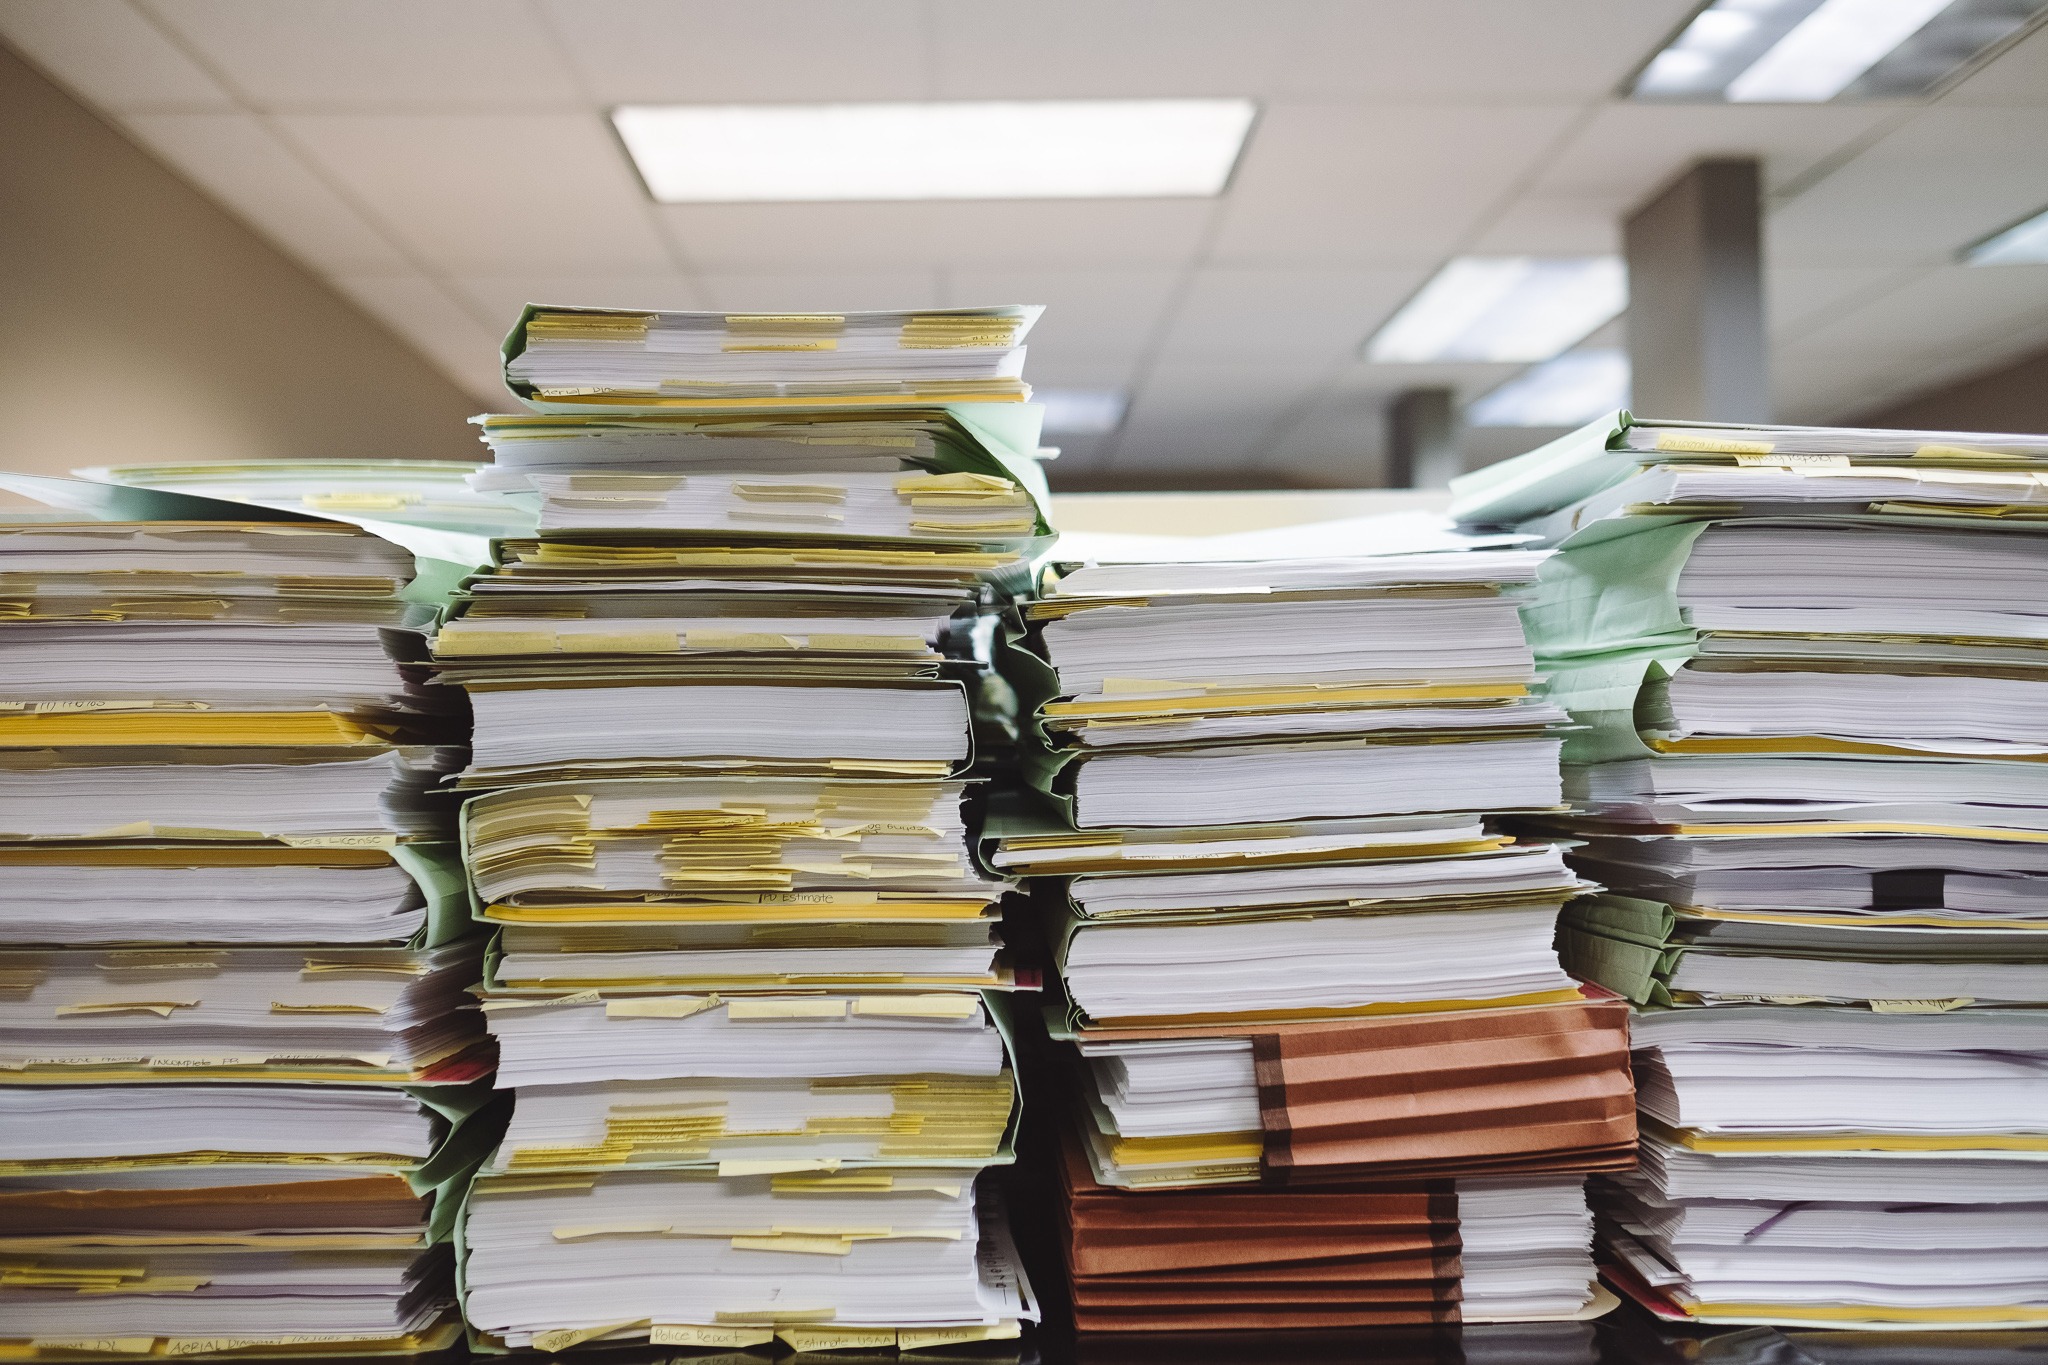 A pile of files staked up on a desk